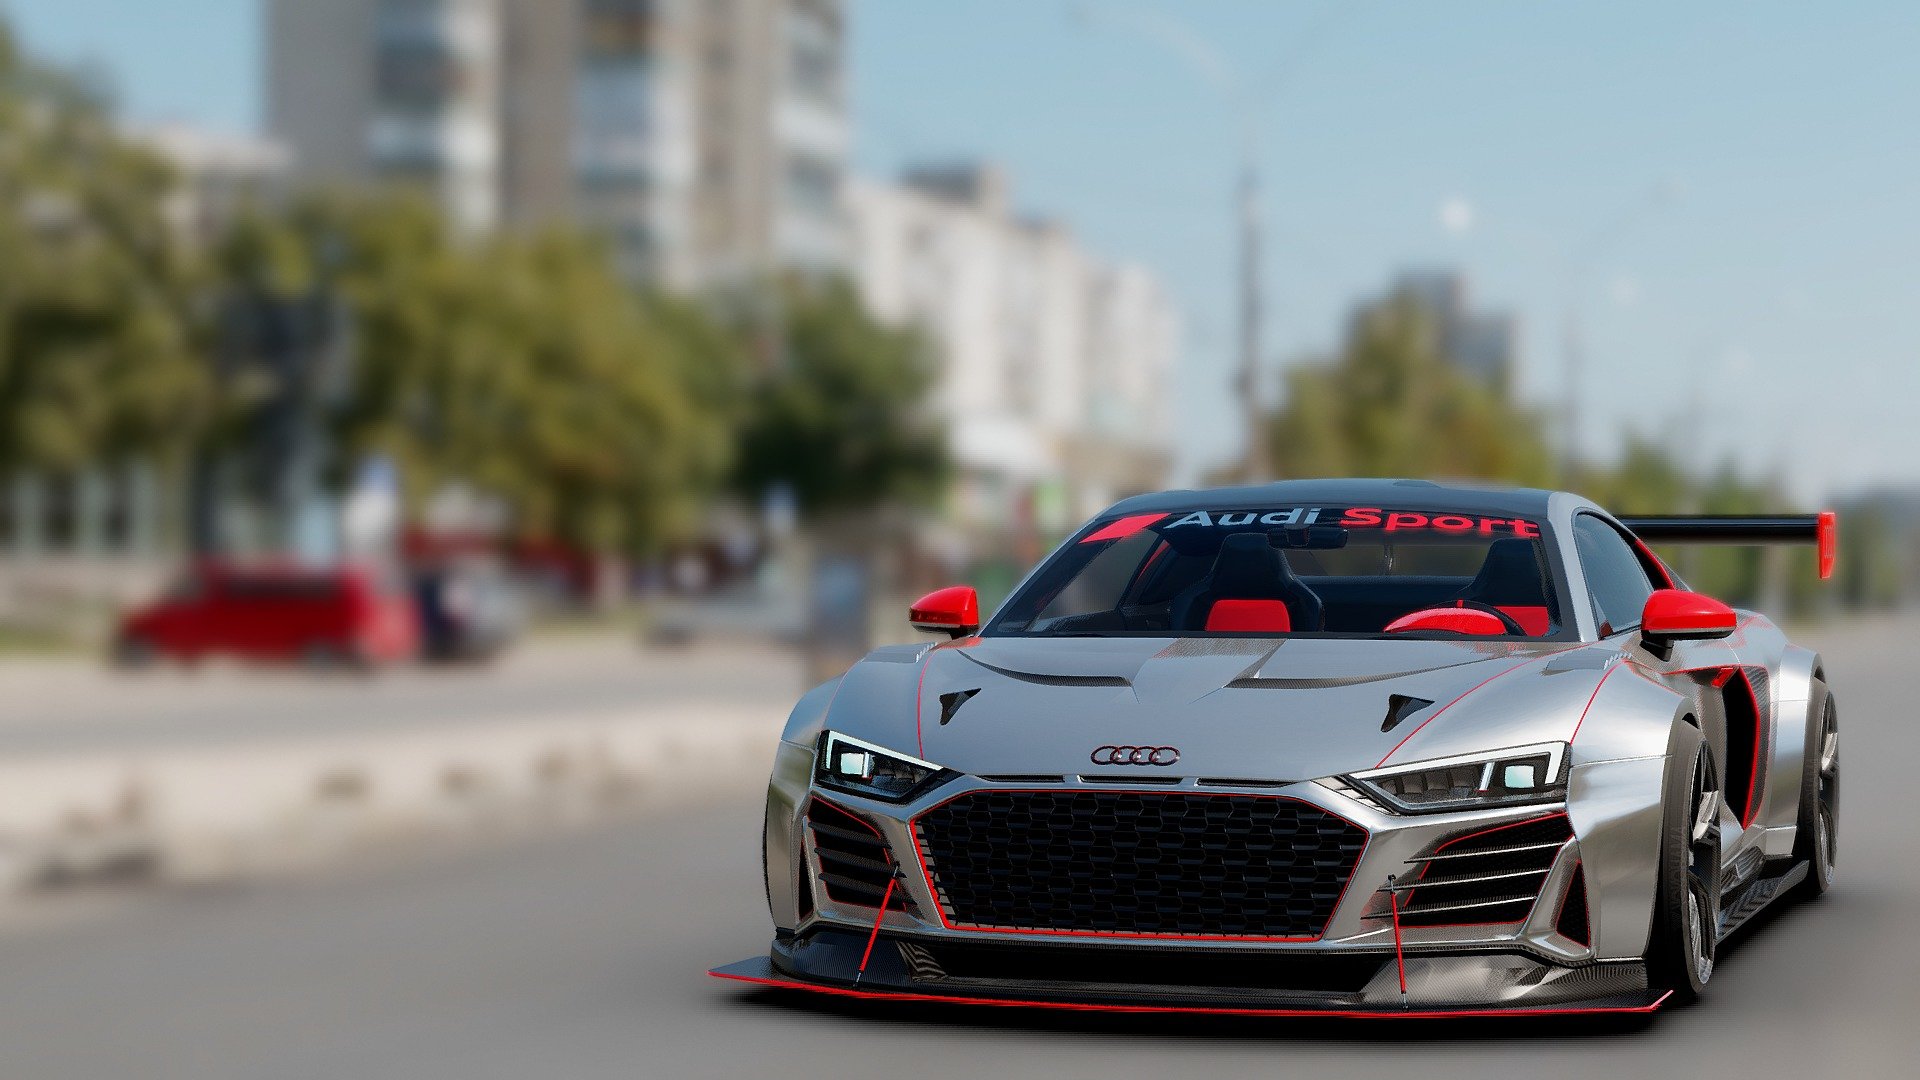 Explore the exquisite design and performance of the Audi R8 V10 with this high-quality 3D model. This meticulously crafted 3D representation captures the sleek lines, aerodynamic curves, and iconic features of the Audi R8 V10, making it an ideal asset for automotive enthusiasts, digital artists, and designers. Whether you're working on a virtual showroom, animation project, or simply want to appreciate the beauty of this legendary sports car, this 3D model offers exceptional detail and accuracy. Compatible with a variety of 3D software, this model brings the allure of the Audi R8 V10 to your creative projects. Please ensure compliance with licensing terms and usage rights 3d model